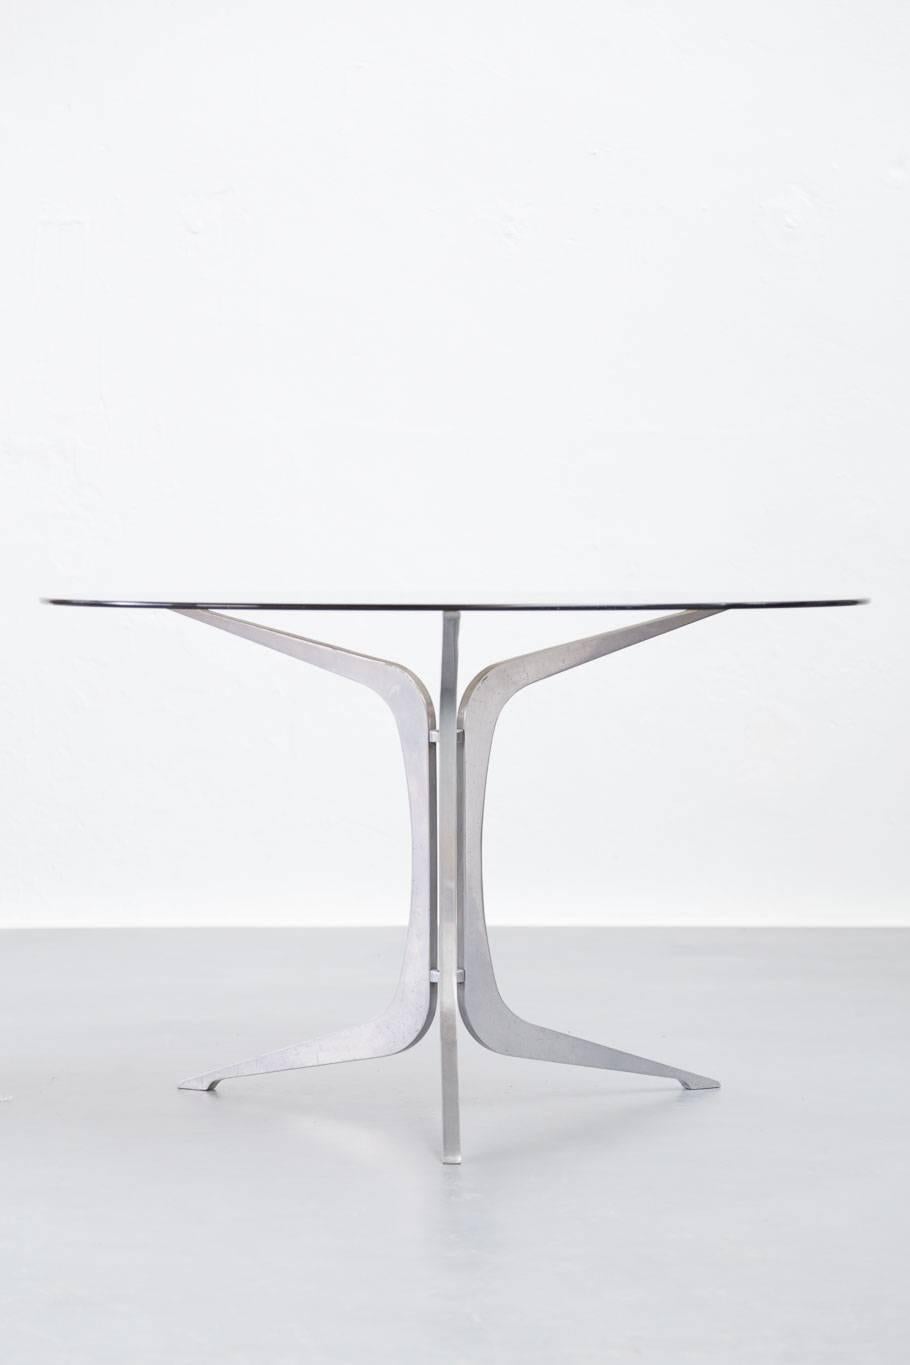 Mid-Century Modern Modernist Dining Table 1960s Smoked Glass